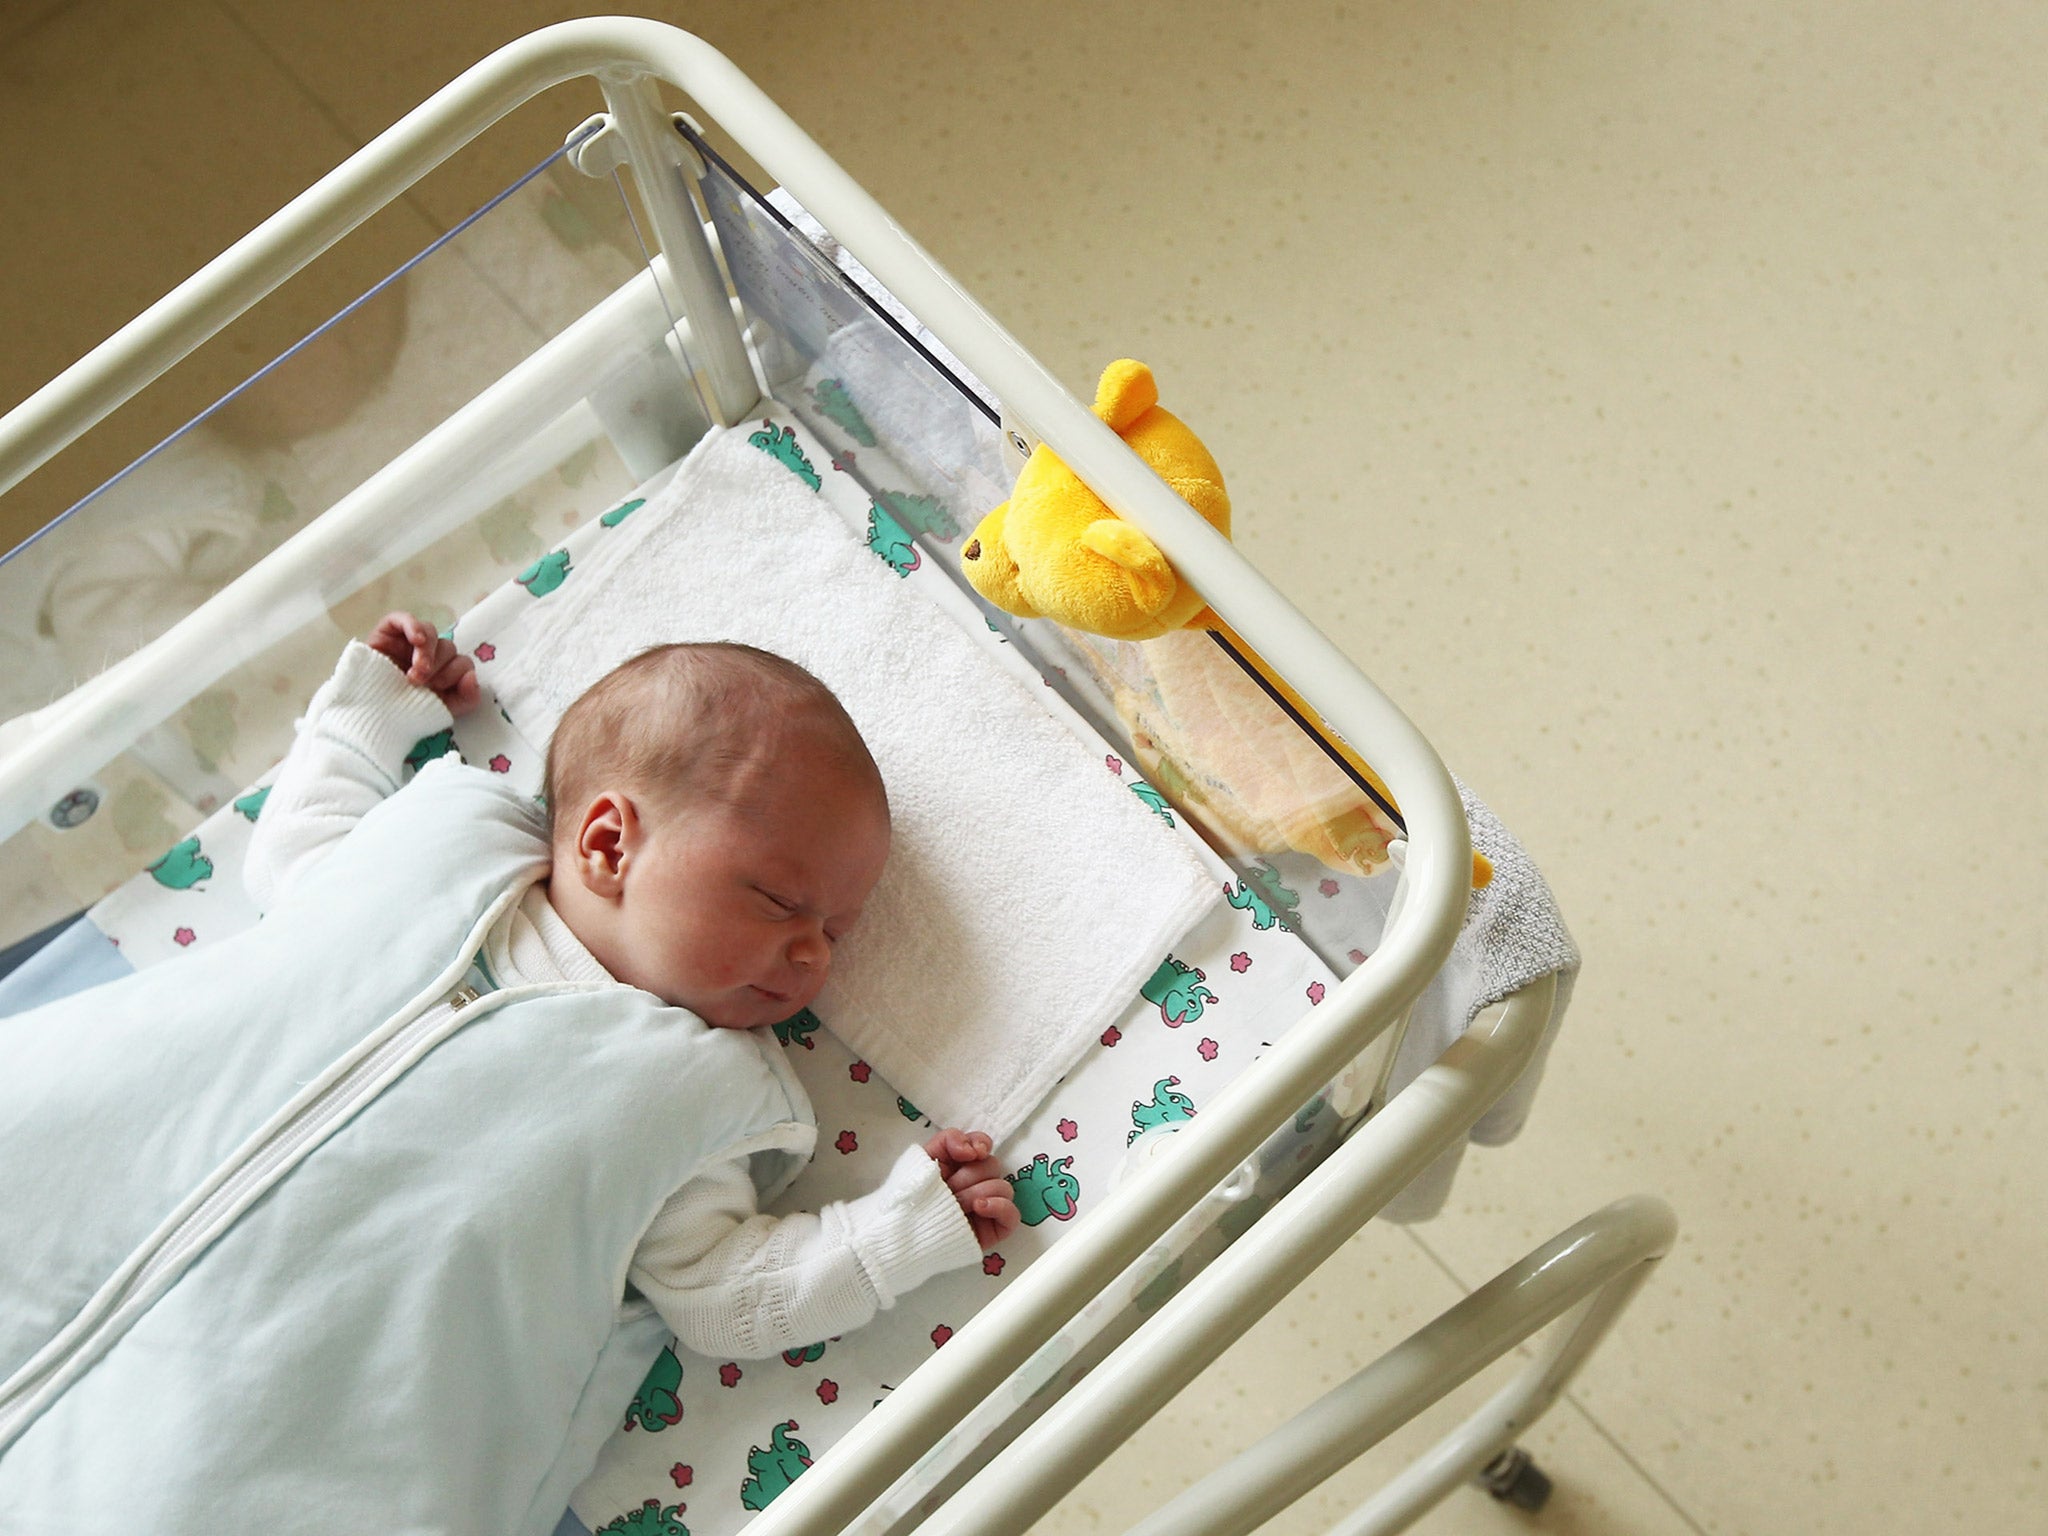 There were 695,233 live births in England and Wales in 2014